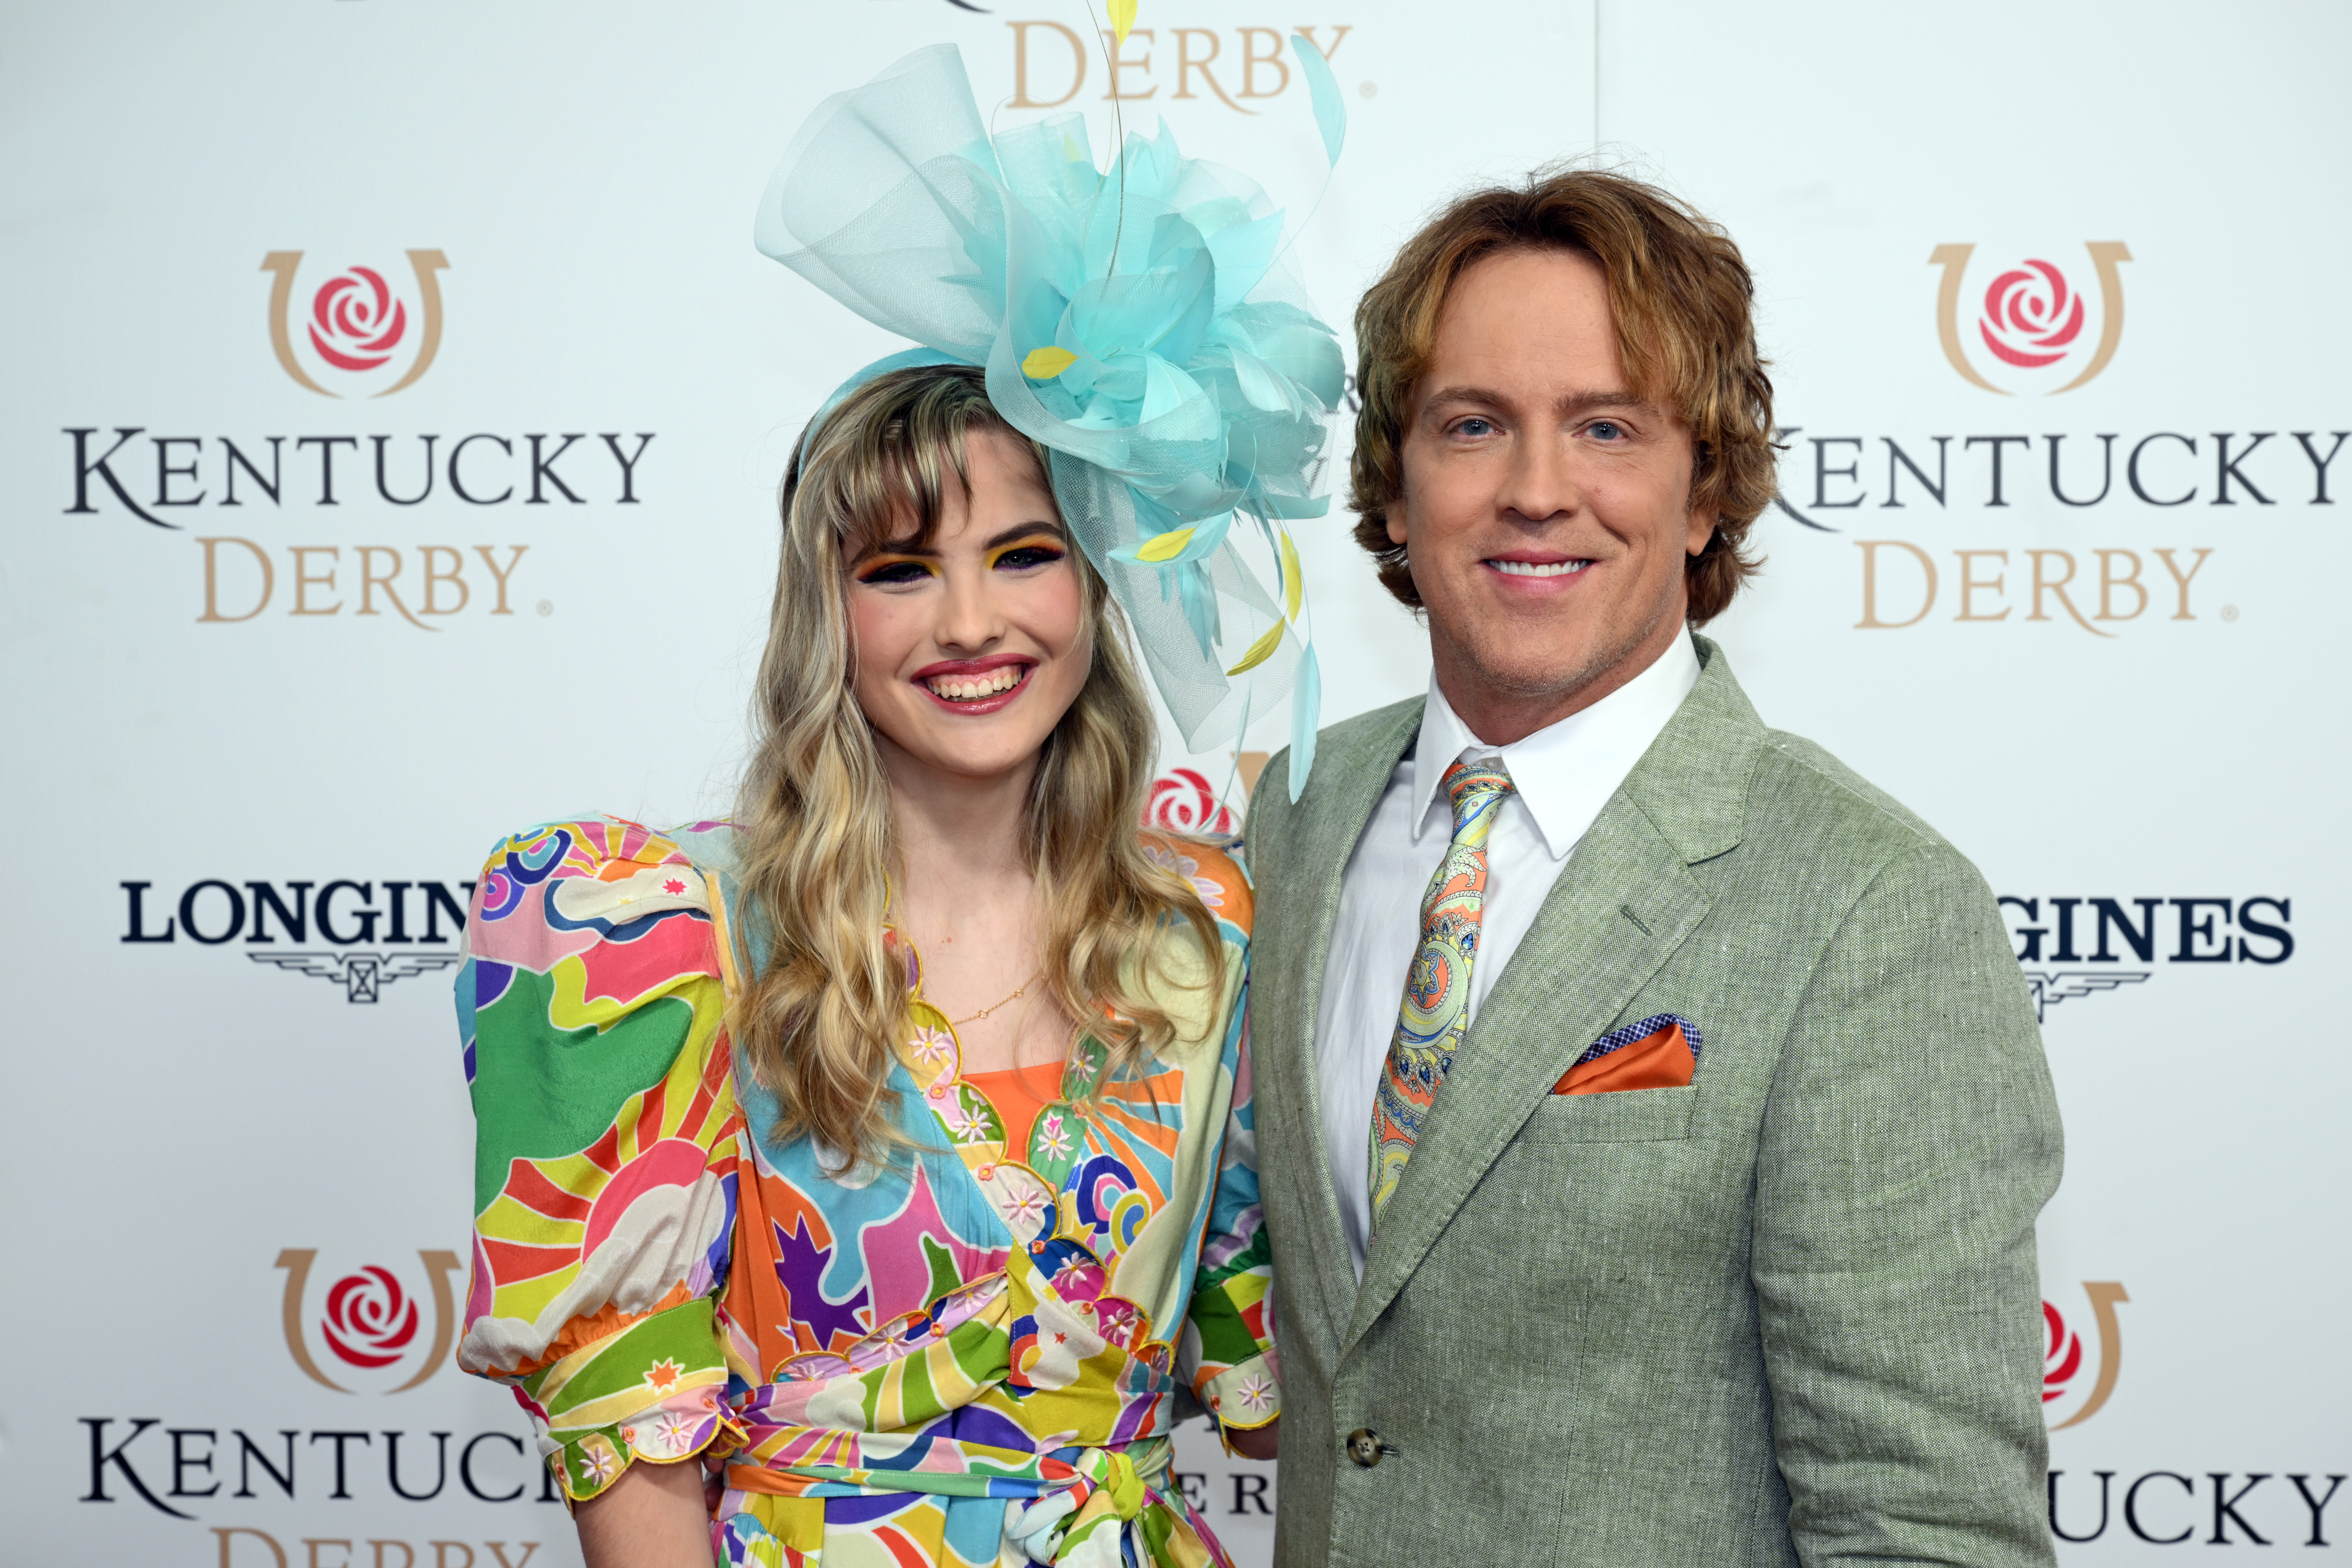 Dannielynn Birkhead and Larry Birkhead at the 148th Kentucky Derby at Churchill Downs on May 7, 2022 in Louisville, Kentucky. | Source: Getty Images